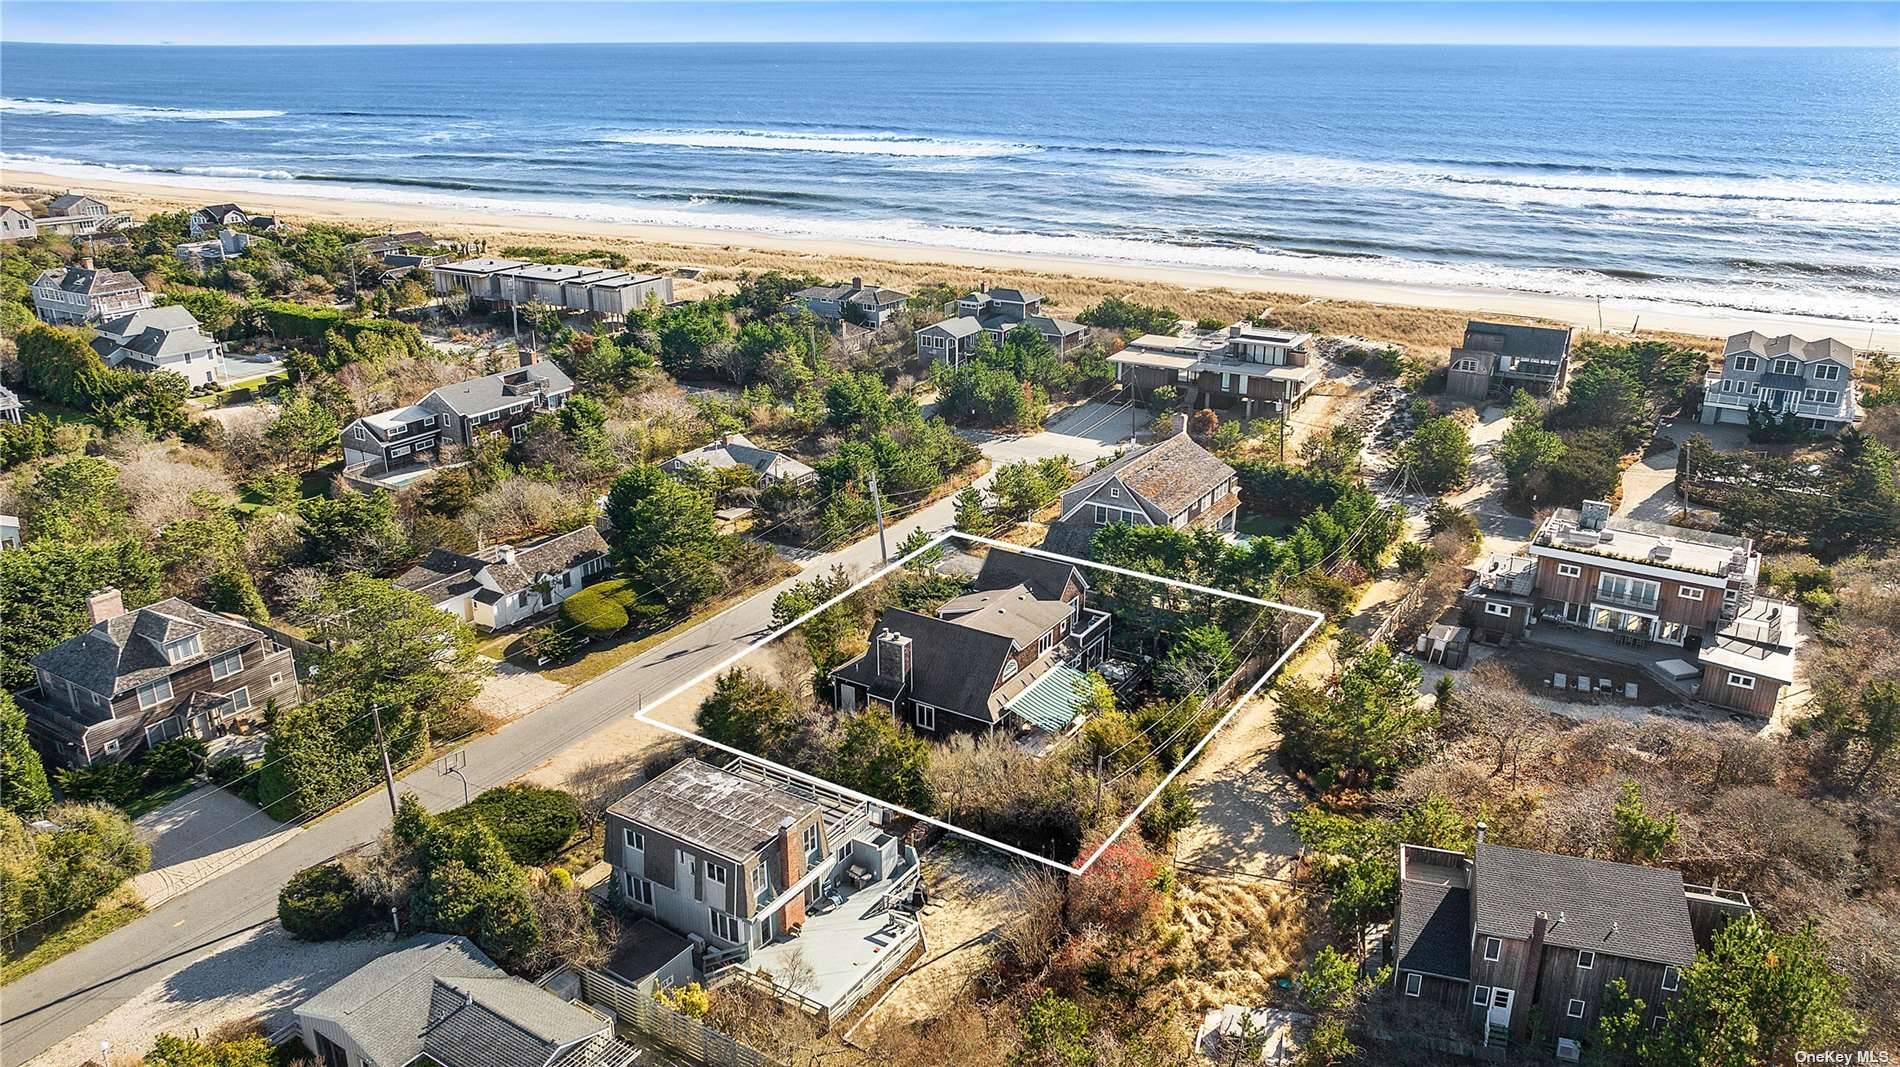 Hear the ocean from this Pre Construction Renovation to be completed before summer.